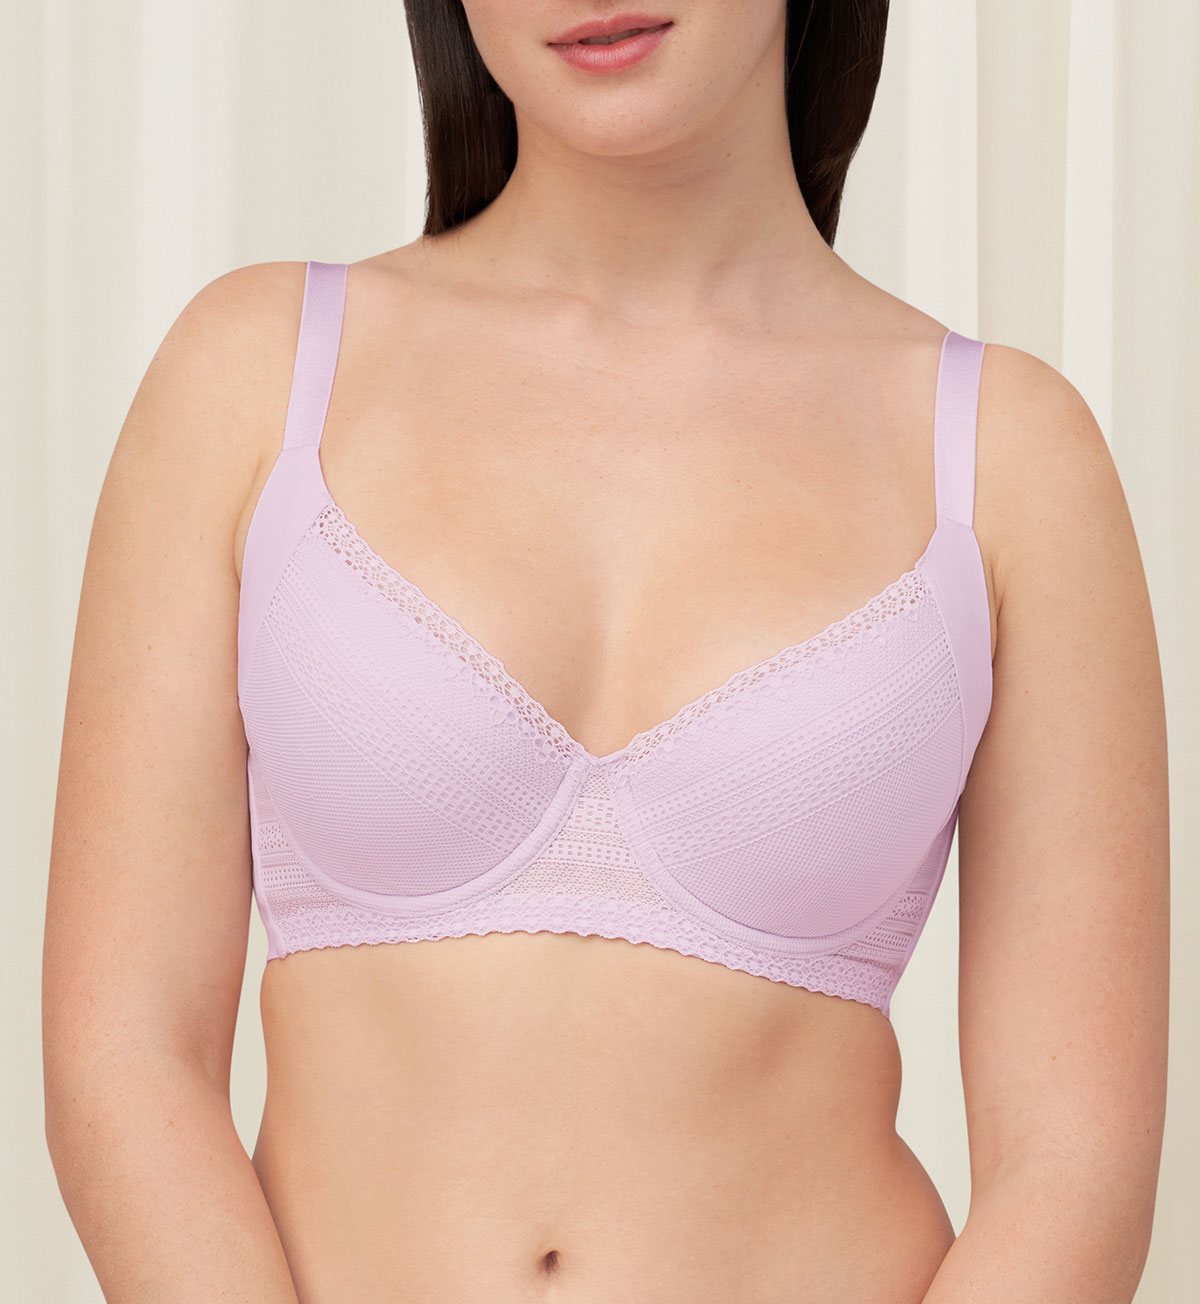 Buy CLOUD SOFT CS05 Full Support Minimizer Bra for Women Non-Padded,  Non-Wired & Full Coverage with Seamless Cup Grey at